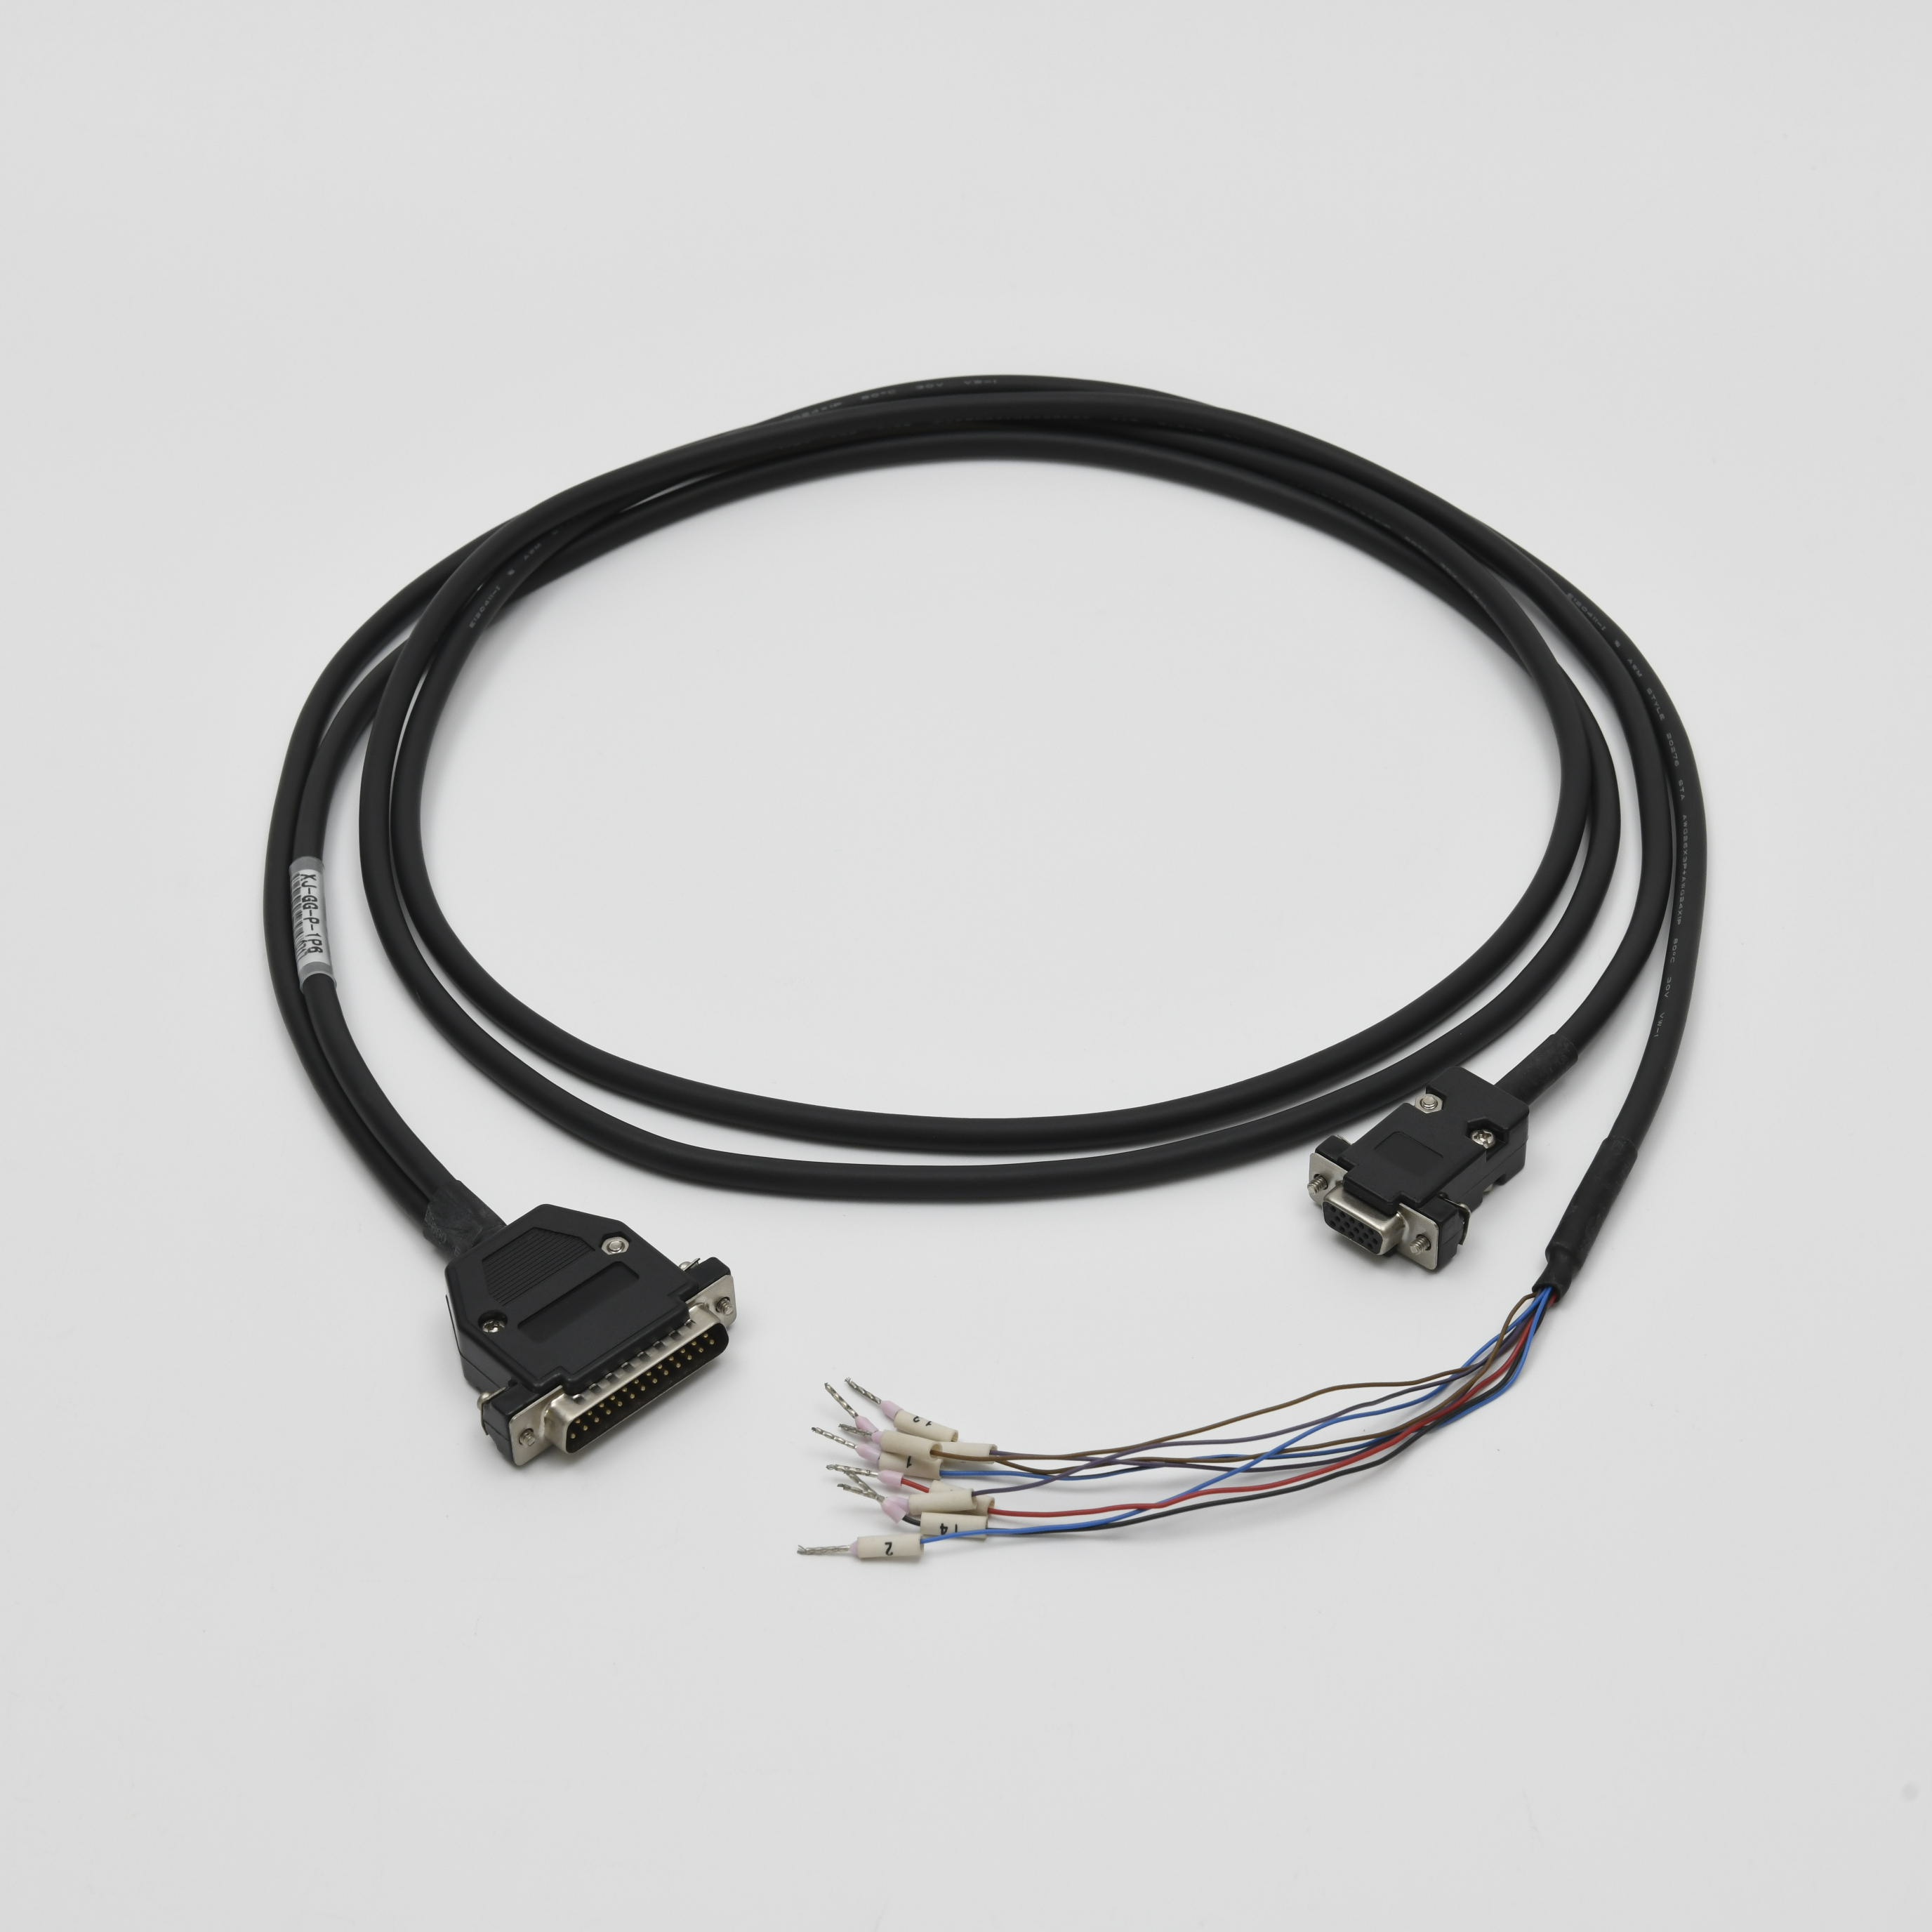 Driver wiring harness